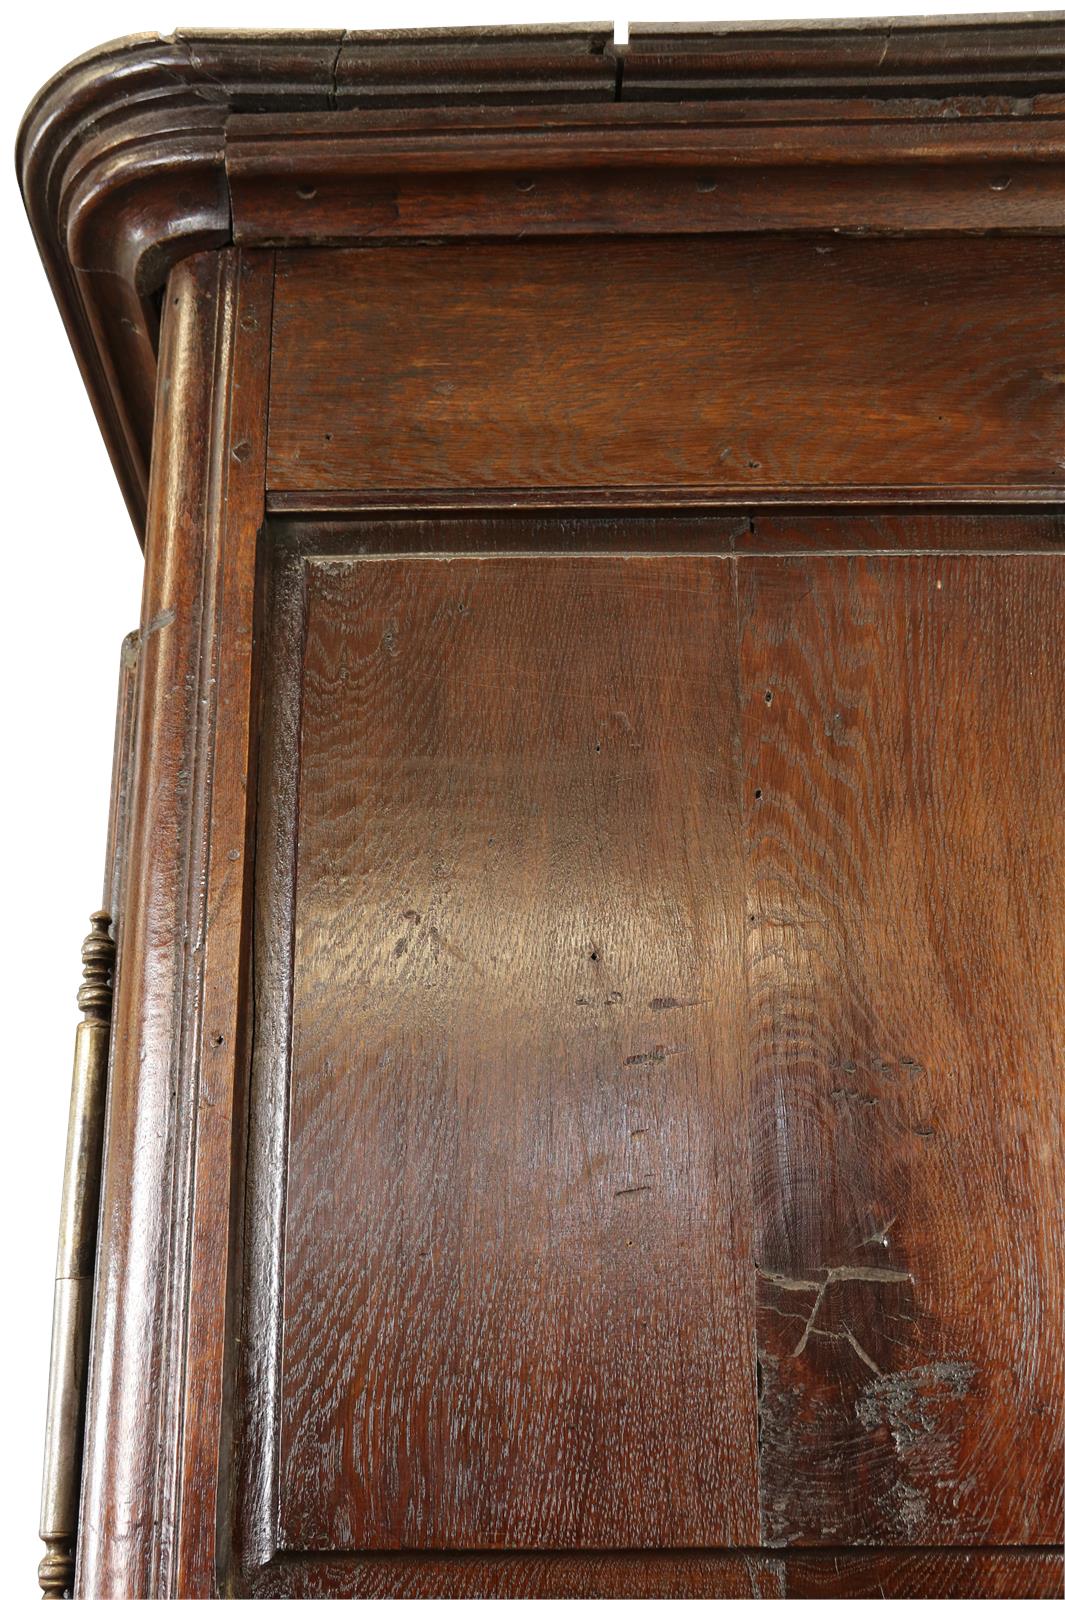 Armoire Antique French Provincial Very Old 1790 Oak Wood Peg Construction Heart -Image 15